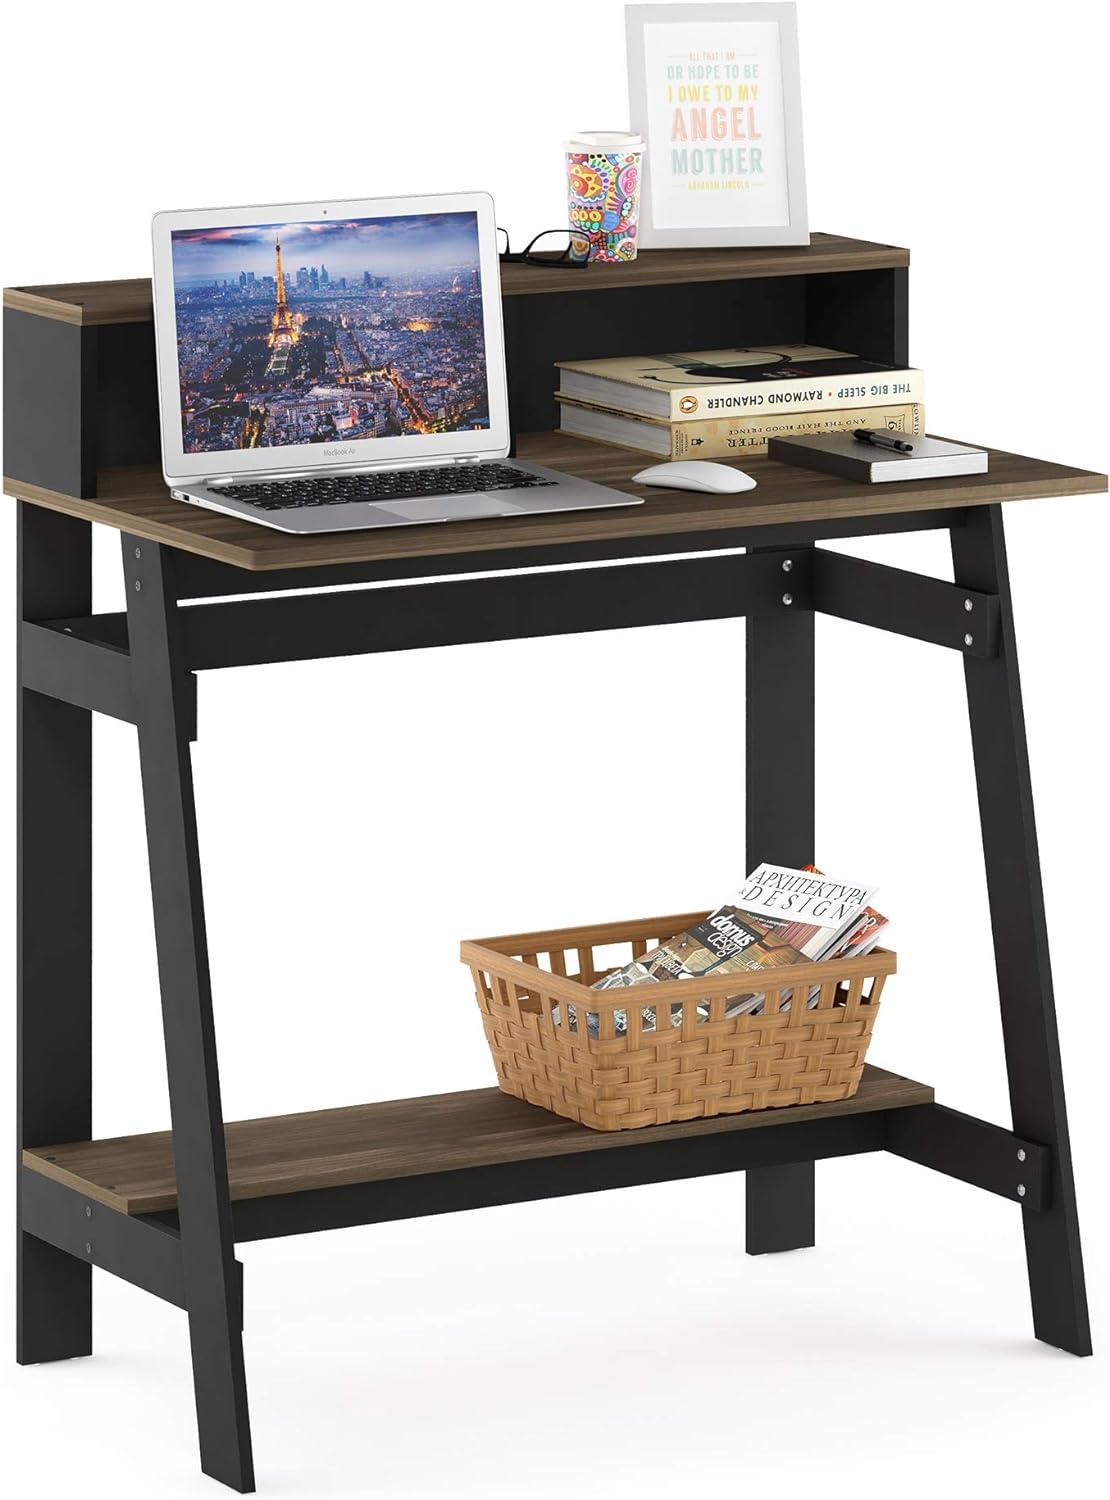 Columbia Walnut A-Frame Foldable Computer Desk with Drawer